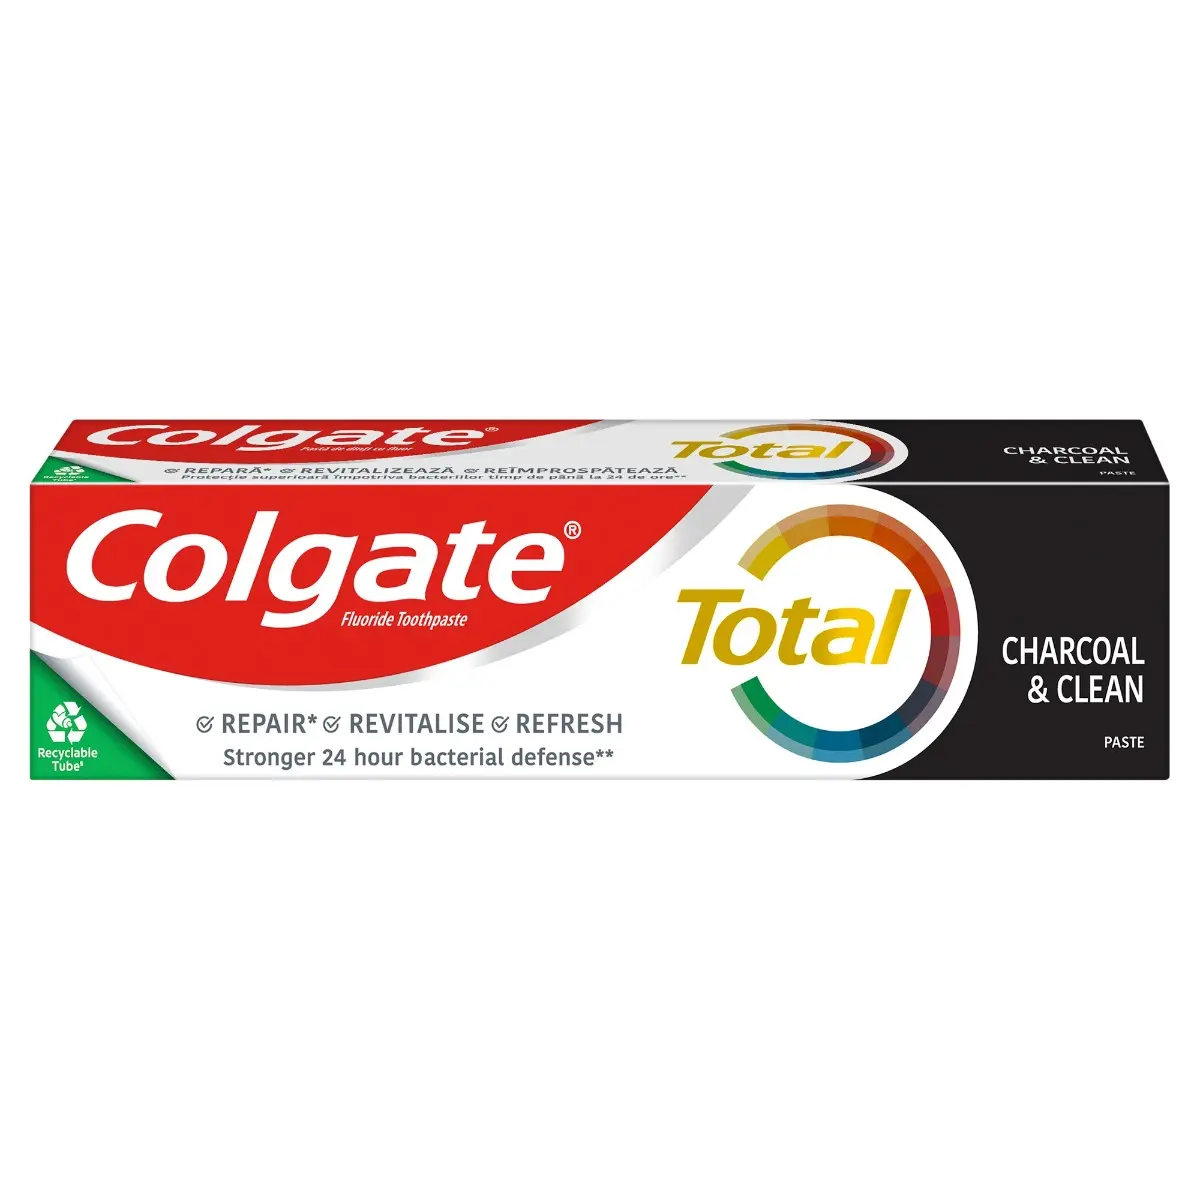 Pasta de dinti Colgate Total Charcoal and Clean 100 ml